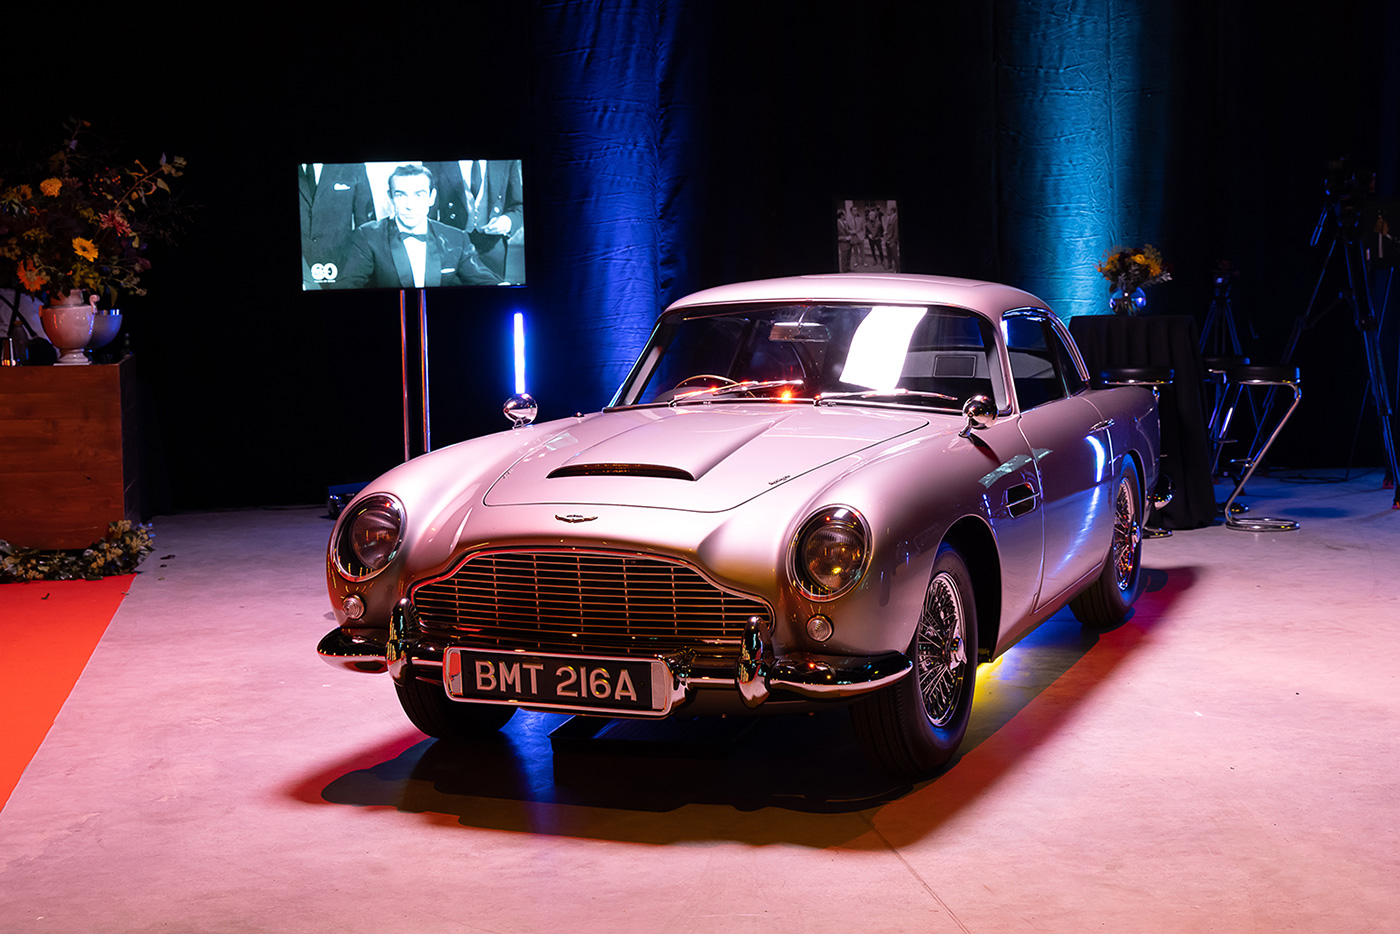 Aston Martin DB5, a replica of the Goldfinger model with working gadgets